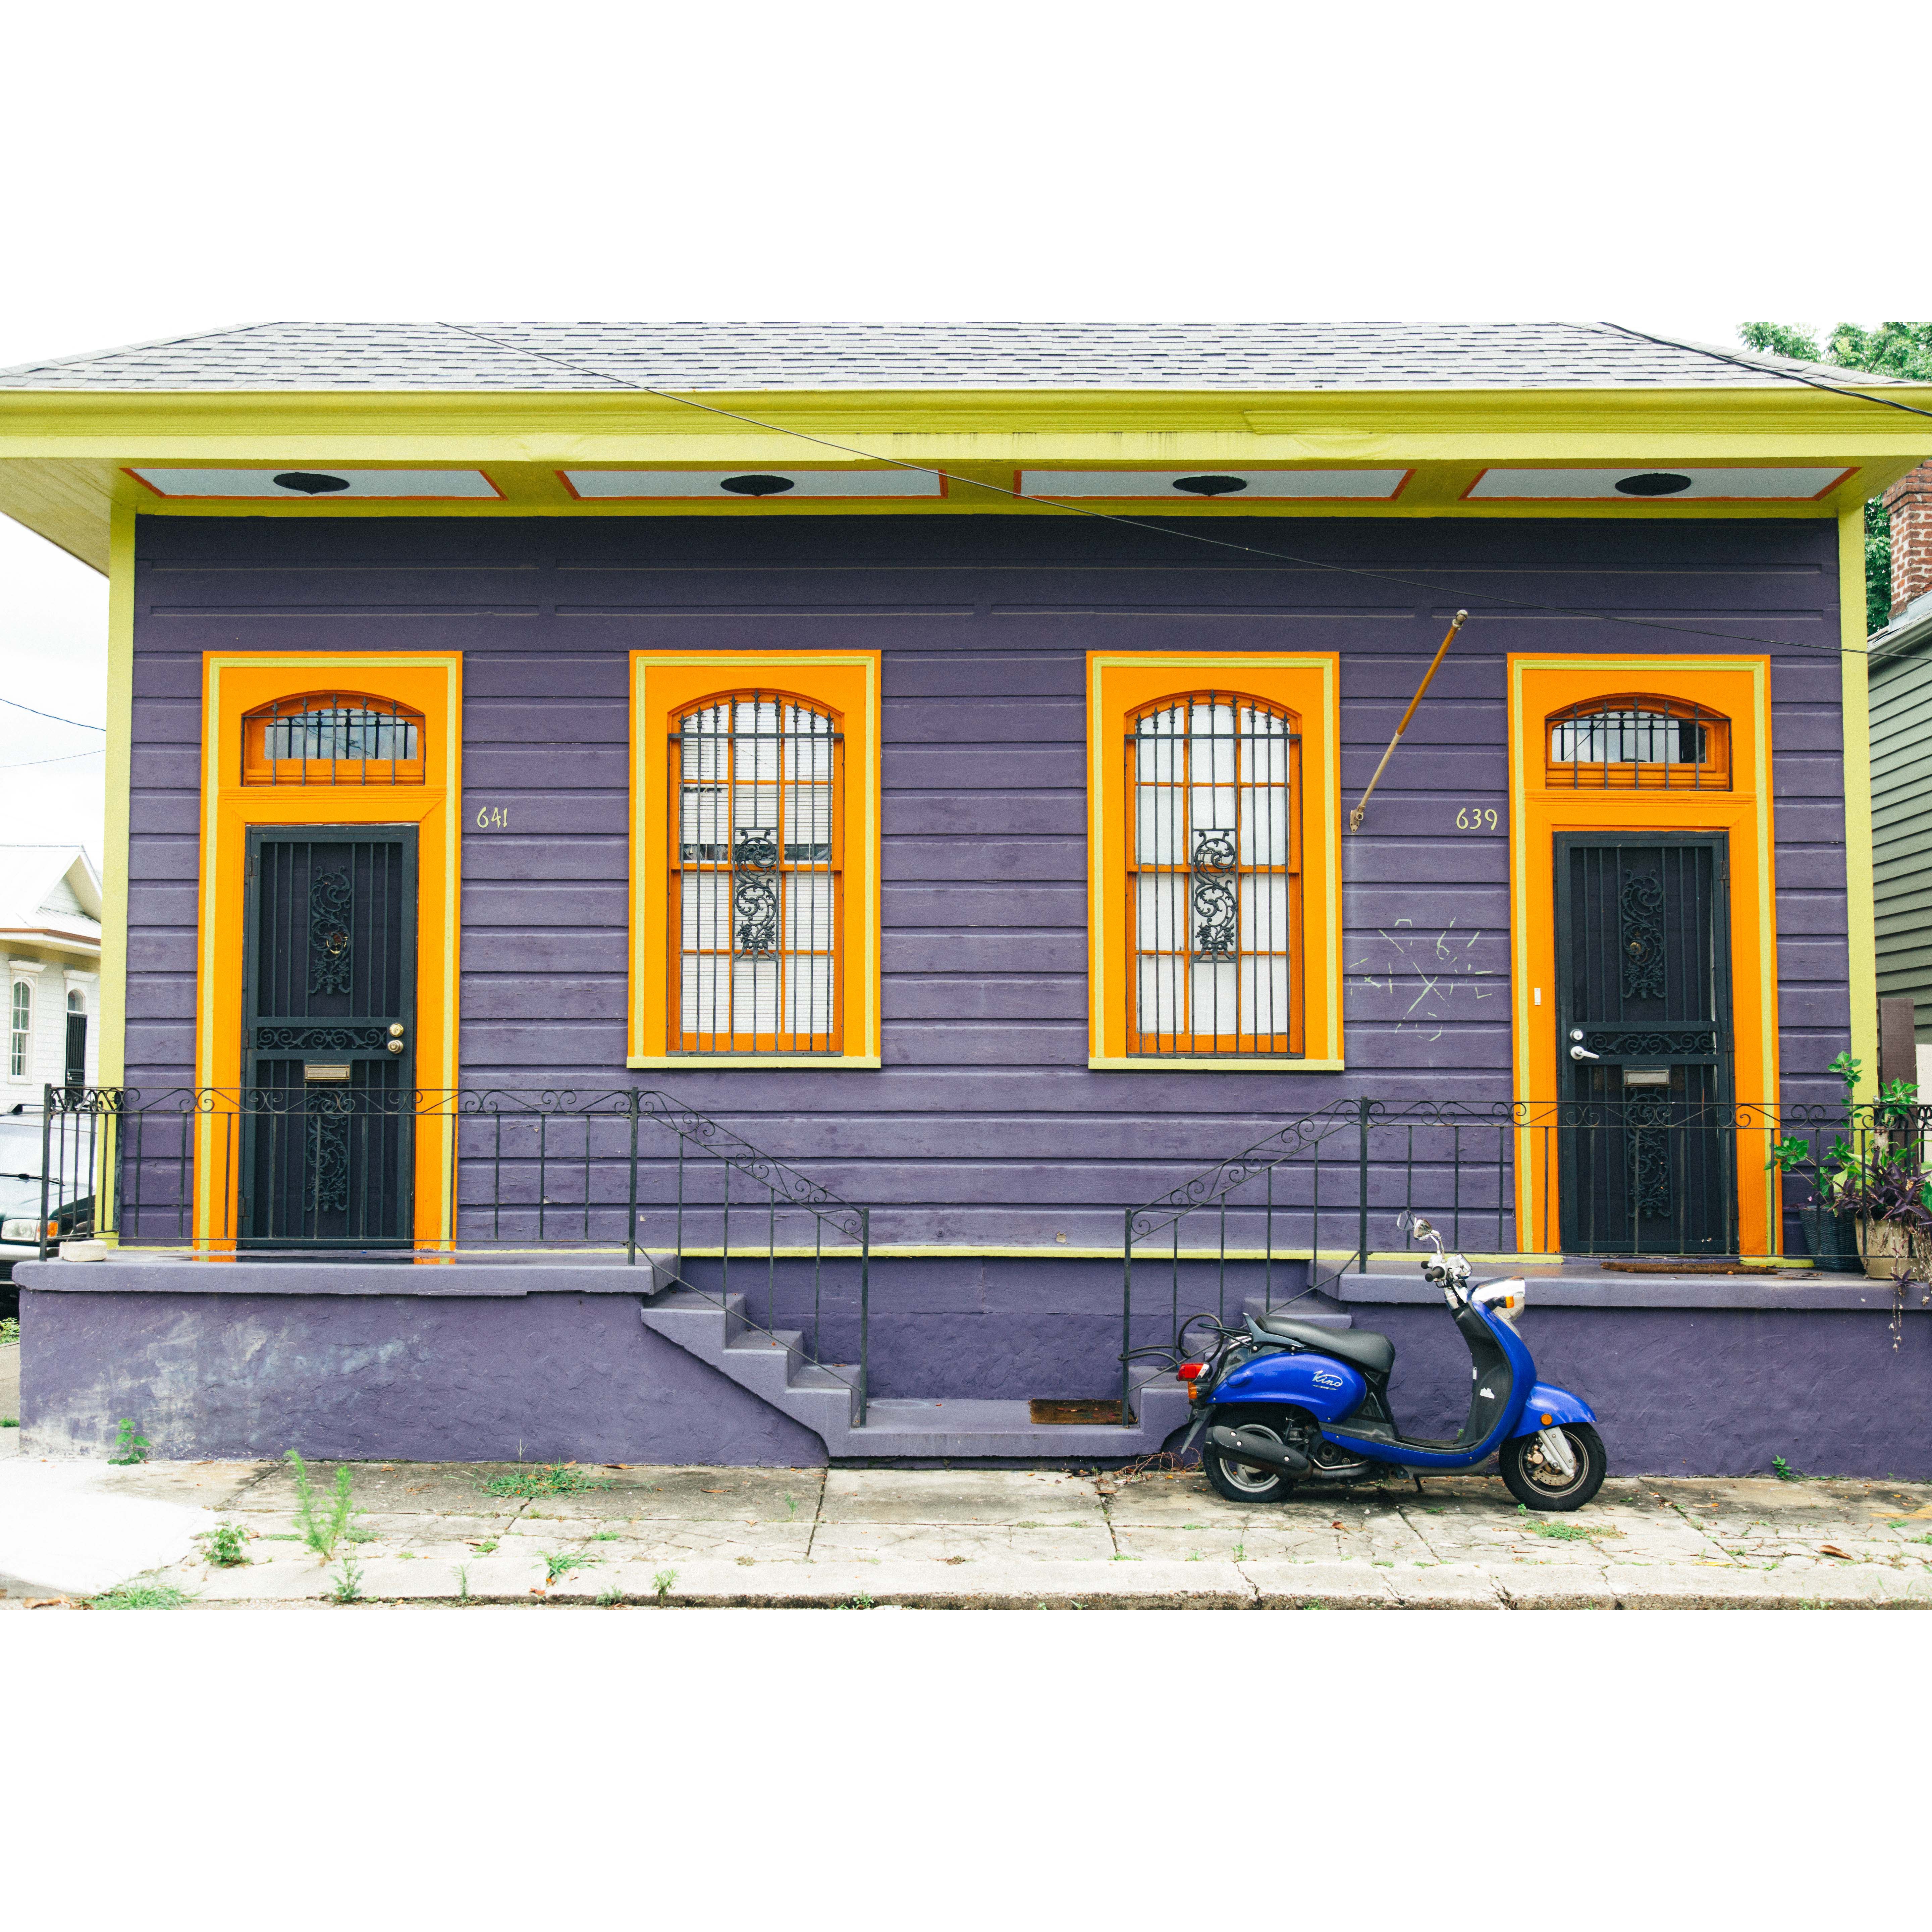 A New Orleans Travel Diary Through The Eyes of Visual Storyteller Whitney Mitchell
